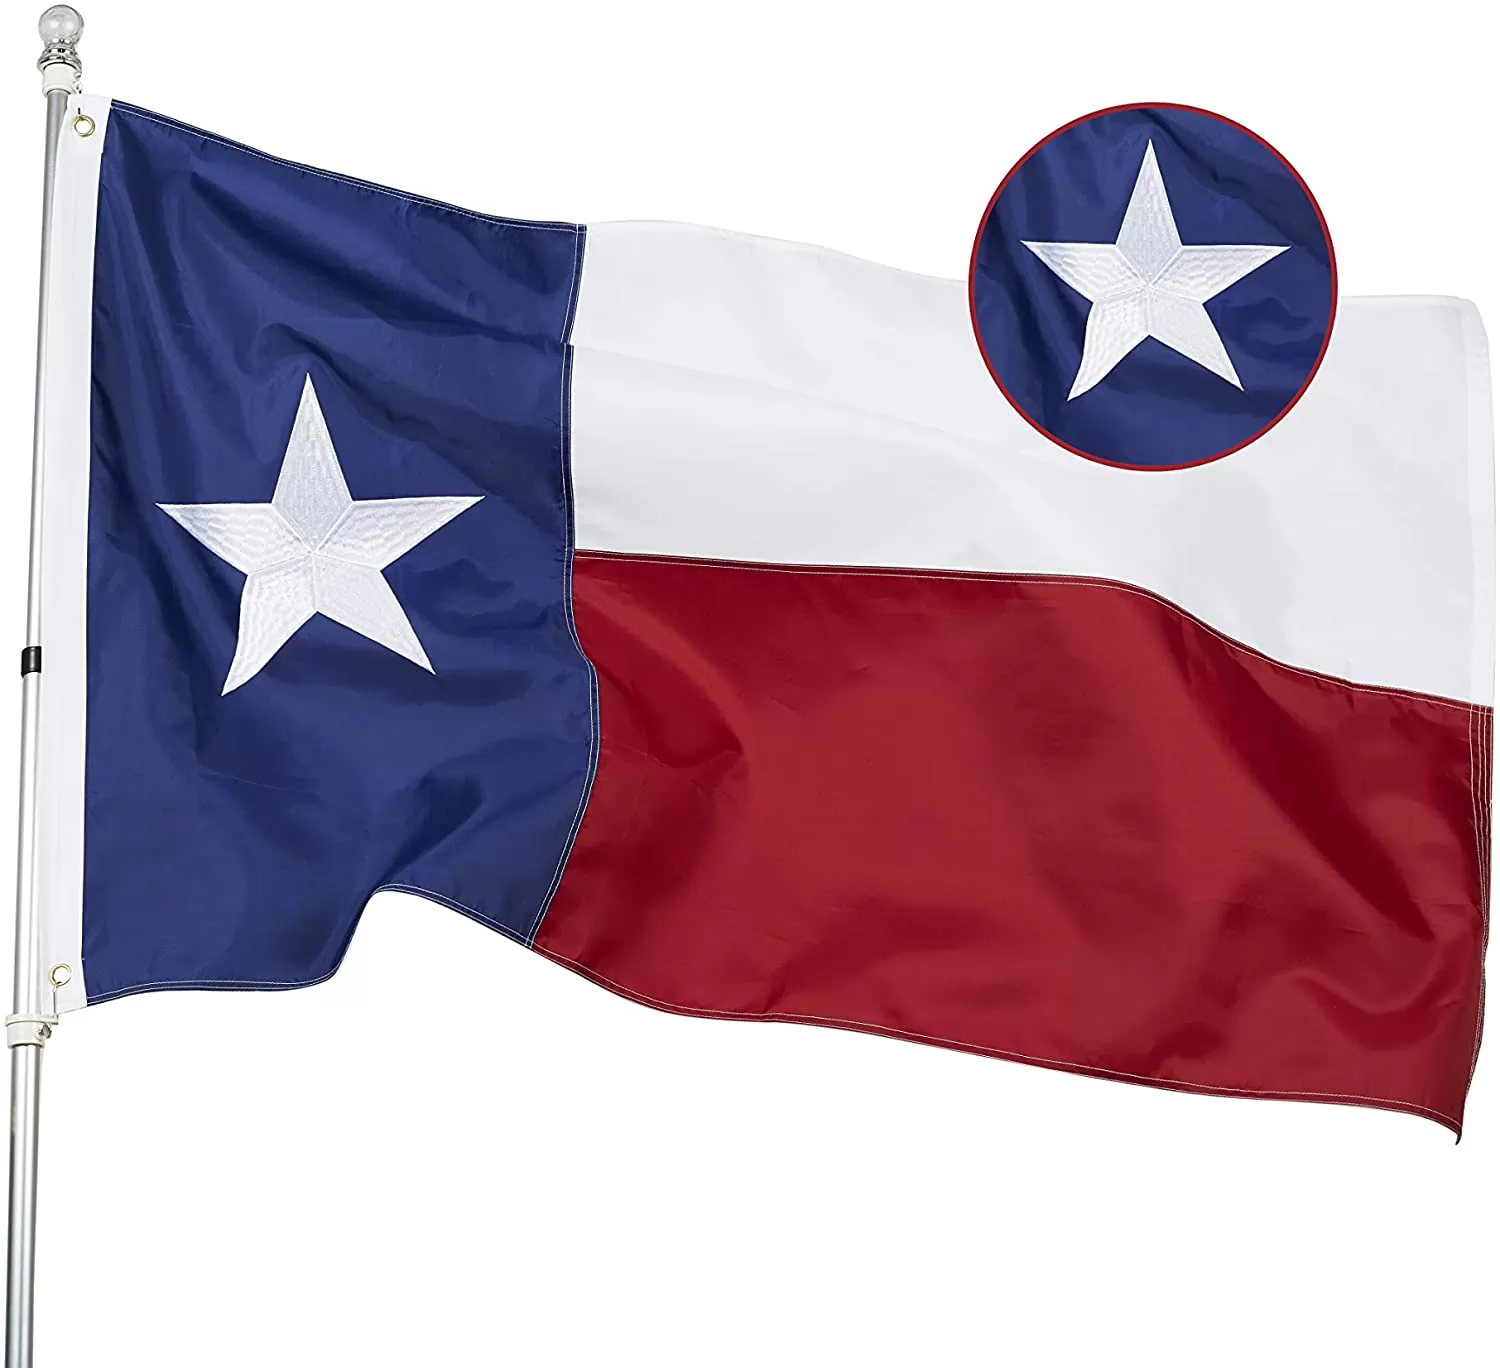 State of Texas 3x5 Feet Flag - Embroidered Sewn Heavyweight 210D Oxford Nylon Flag Vivid Color - Brass Grommets and 4 Stitch Hemming USA Flag